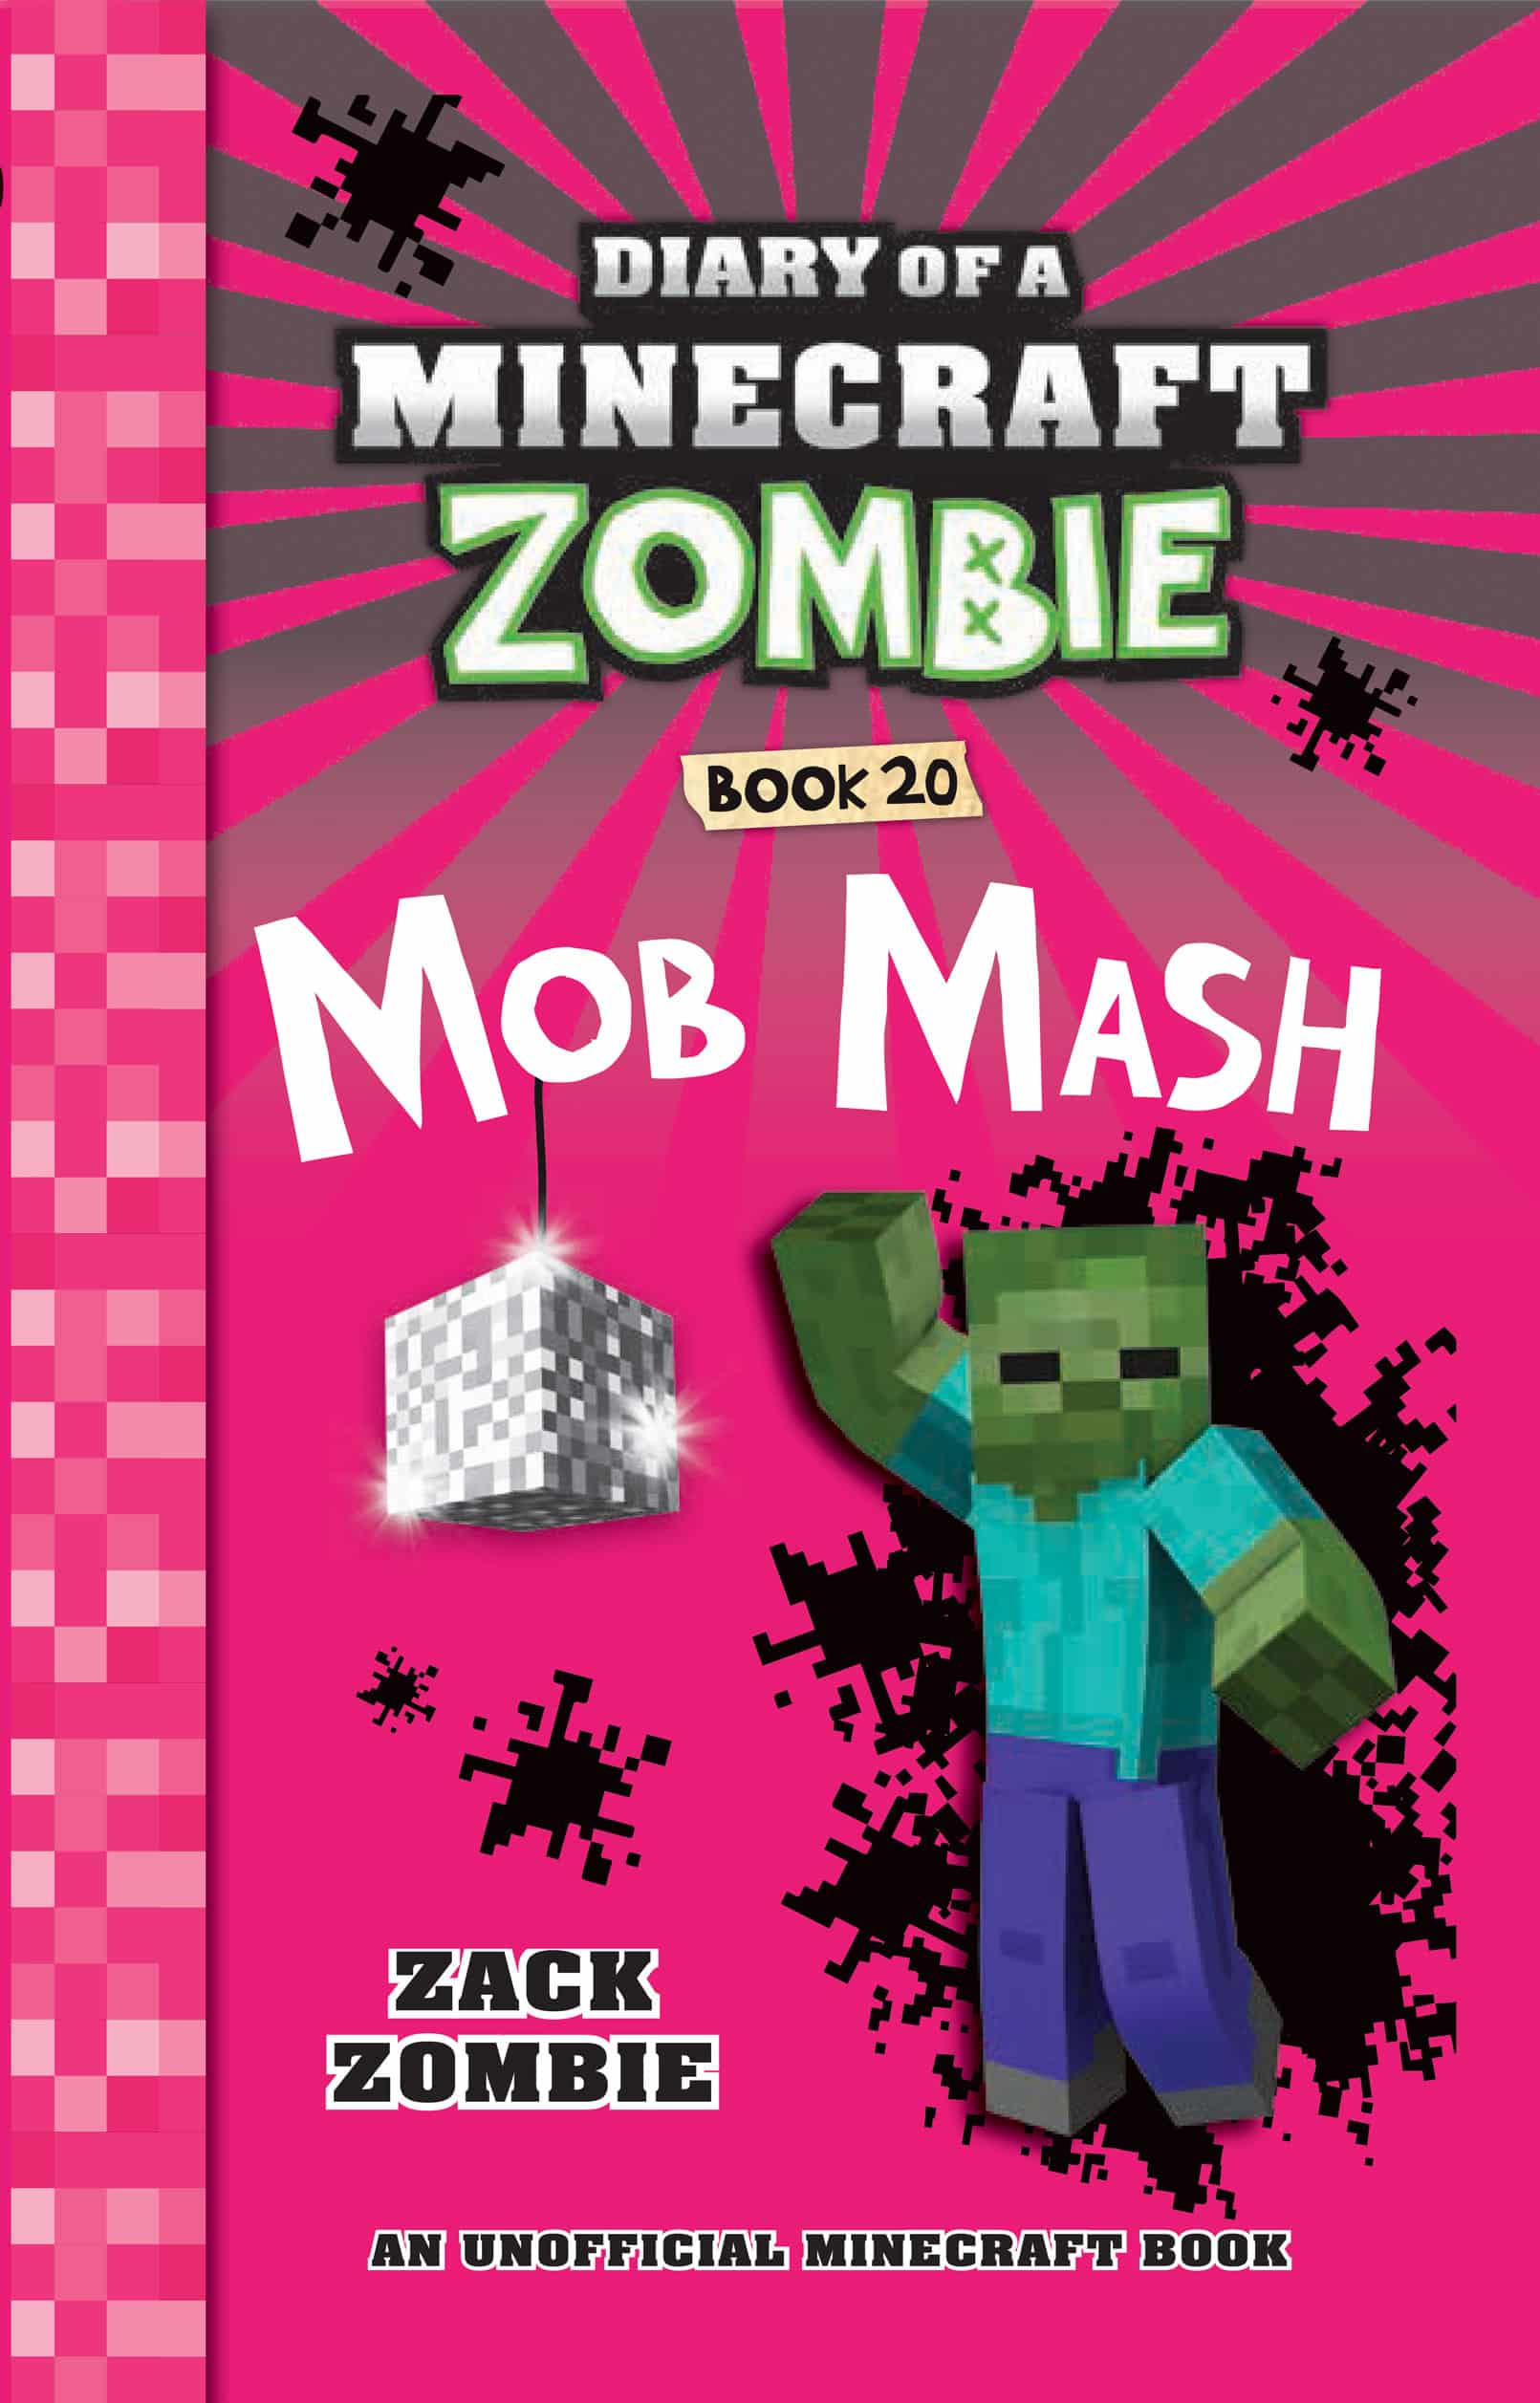 Diary of a Minecraft Zombie Book 20 Mob Mash